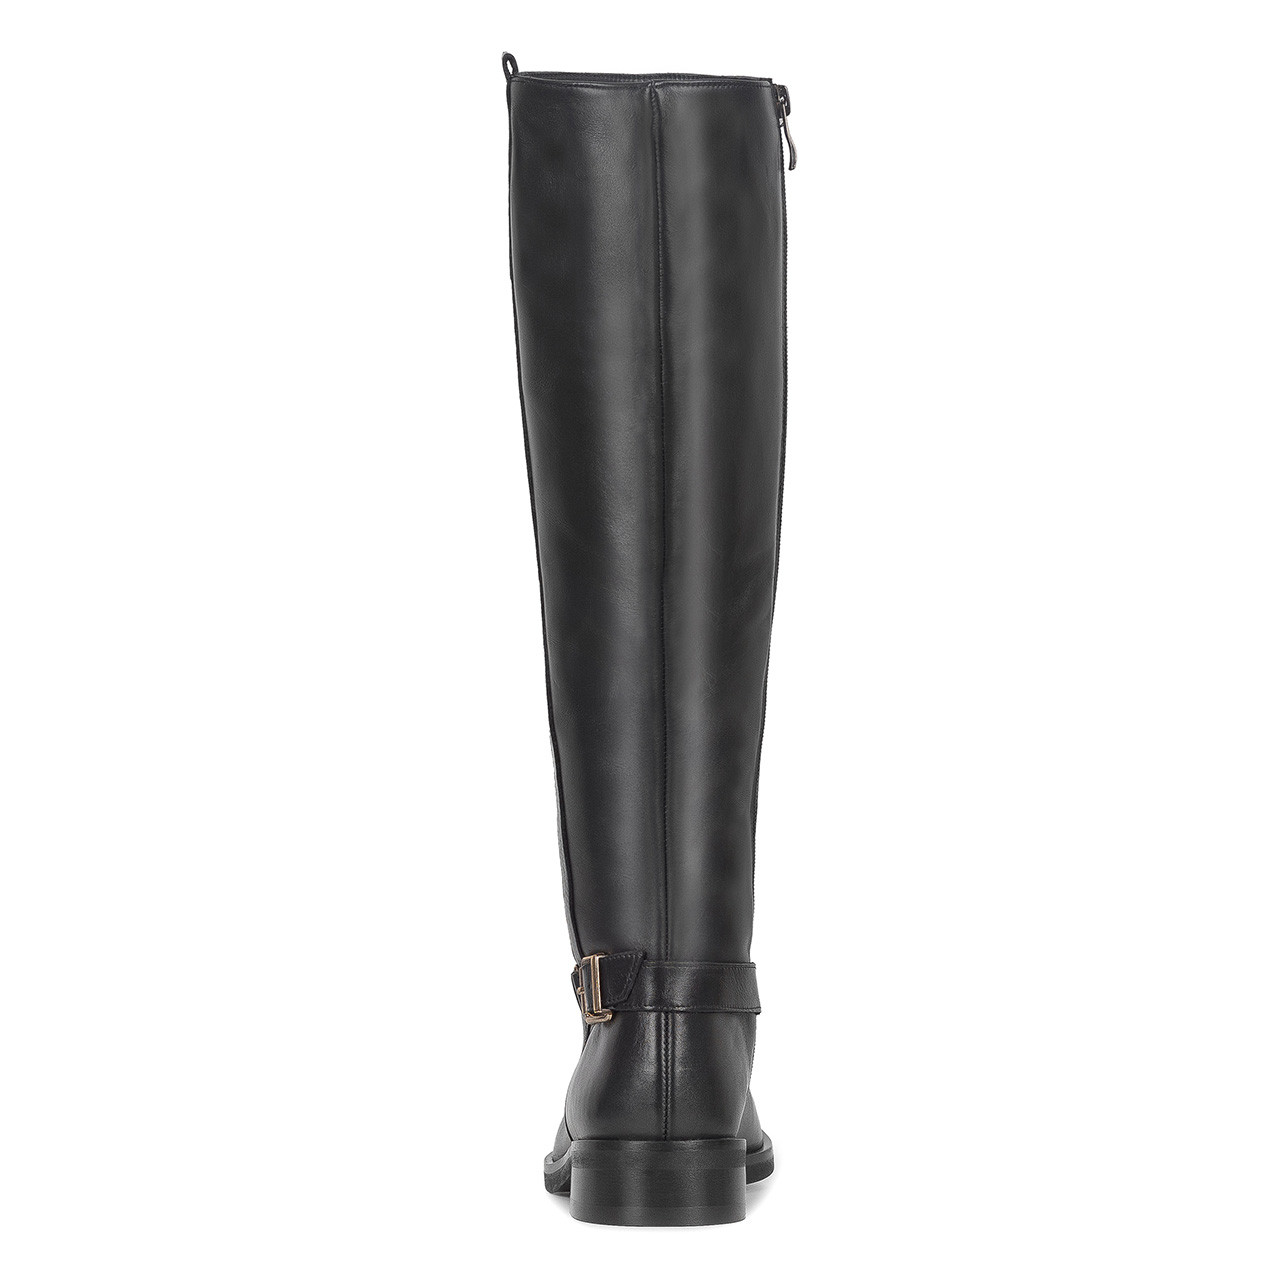 Black leather women’s knee high boots with a flat heels